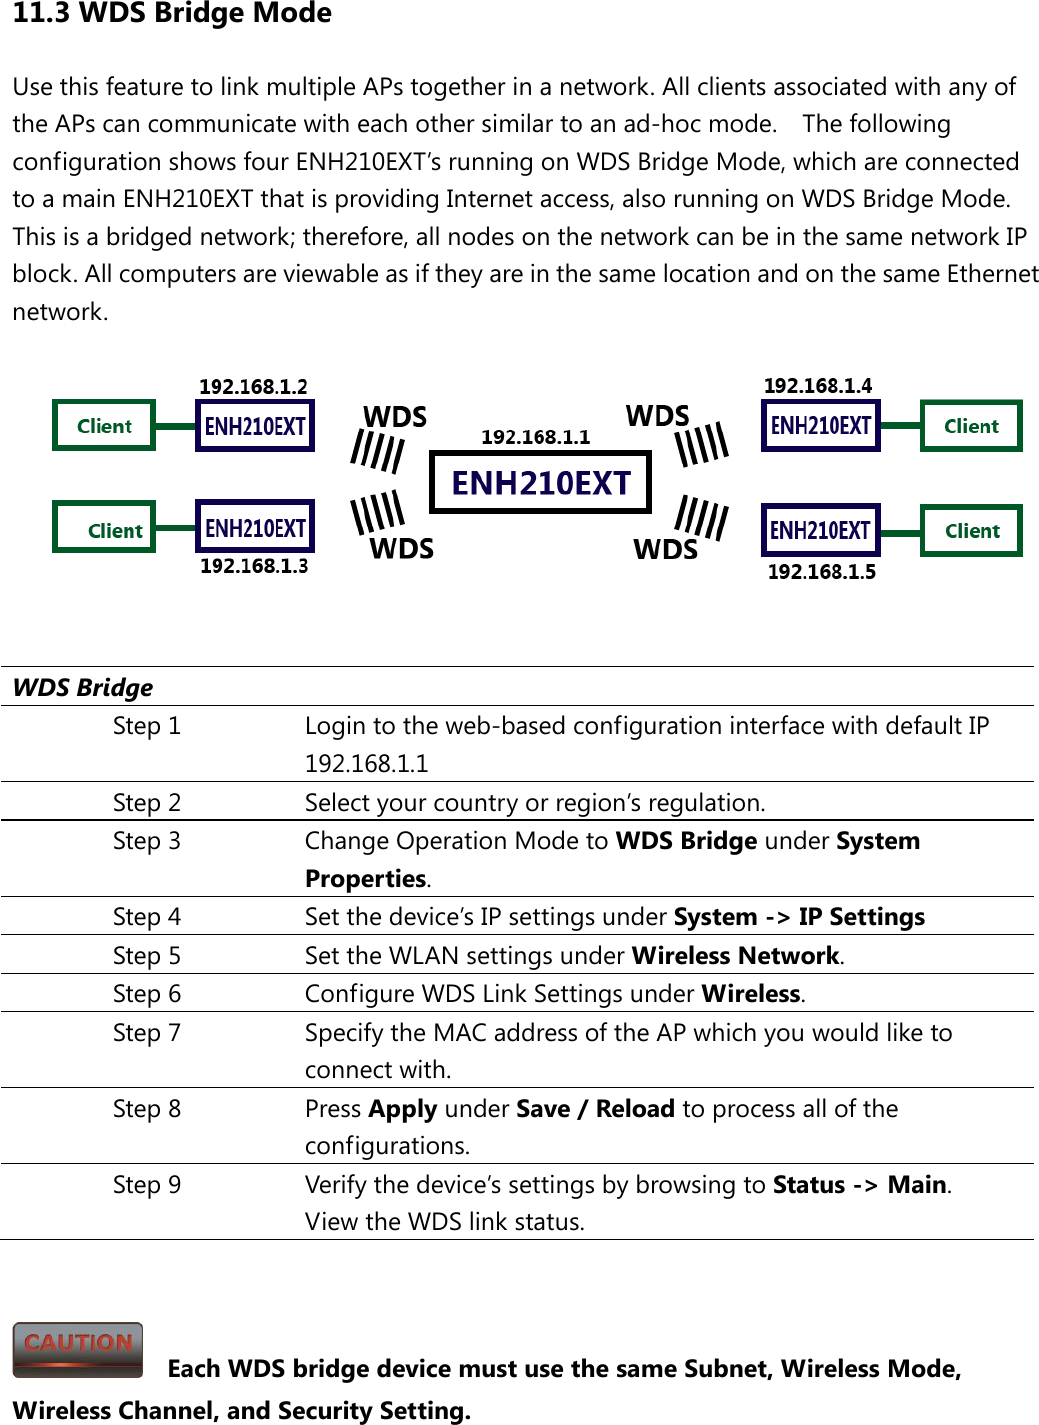 11.3 WDS Bridge Mode Use this feature to link multiple APs together in a network. All clients associated with any of the APs can communicate with each other similar to an ad-hoc mode.    The following configuration shows four ENH210EXT’s running on WDS Bridge Mode, which are connected to a main ENH210EXT that is providing Internet access, also running on WDS Bridge Mode. This is a bridged network; therefore, all nodes on the network can be in the same network IP block. All computers are viewable as if they are in the same location and on the same Ethernet network.     WDS Bridge Step 1 Login to the web-based configuration interface with default IP 192.168.1.1 Step 2 Select your country or region’s regulation. Step 3 Change Operation Mode to WDS Bridge under System Properties. Step 4 Set the device’s IP settings under System -&gt; IP Settings Step 5 Set the WLAN settings under Wireless Network. Step 6 Configure WDS Link Settings under Wireless. Step 7 Specify the MAC address of the AP which you would like to connect with. Step 8 Press Apply under Save / Reload to process all of the configurations. Step 9 Verify the device’s settings by browsing to Status -&gt; Main.  View the WDS link status.     Each WDS bridge device must use the same Subnet, Wireless Mode, Wireless Channel, and Security Setting. 